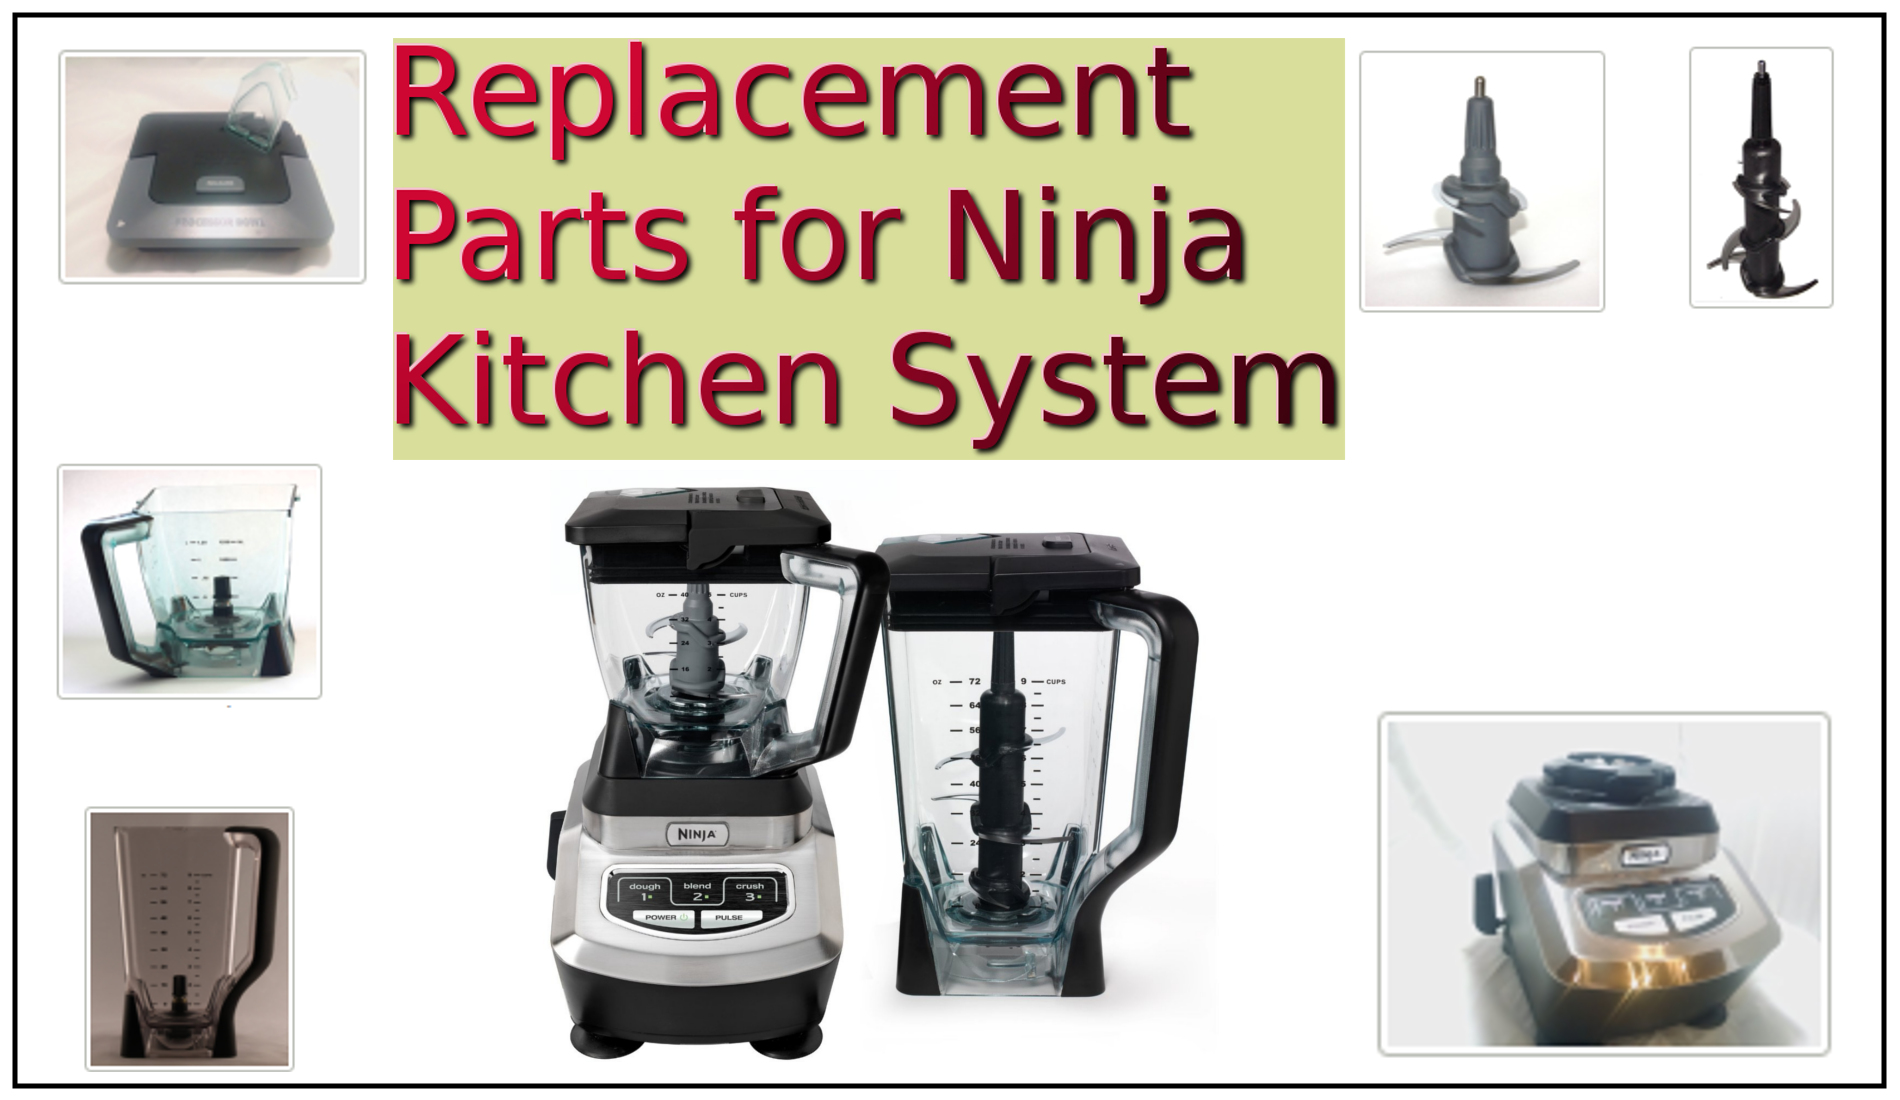 https://www.dontpinchmywallet.com/wp-content/uploads/2016/05/ninjakitchensystem-replacementparts.png